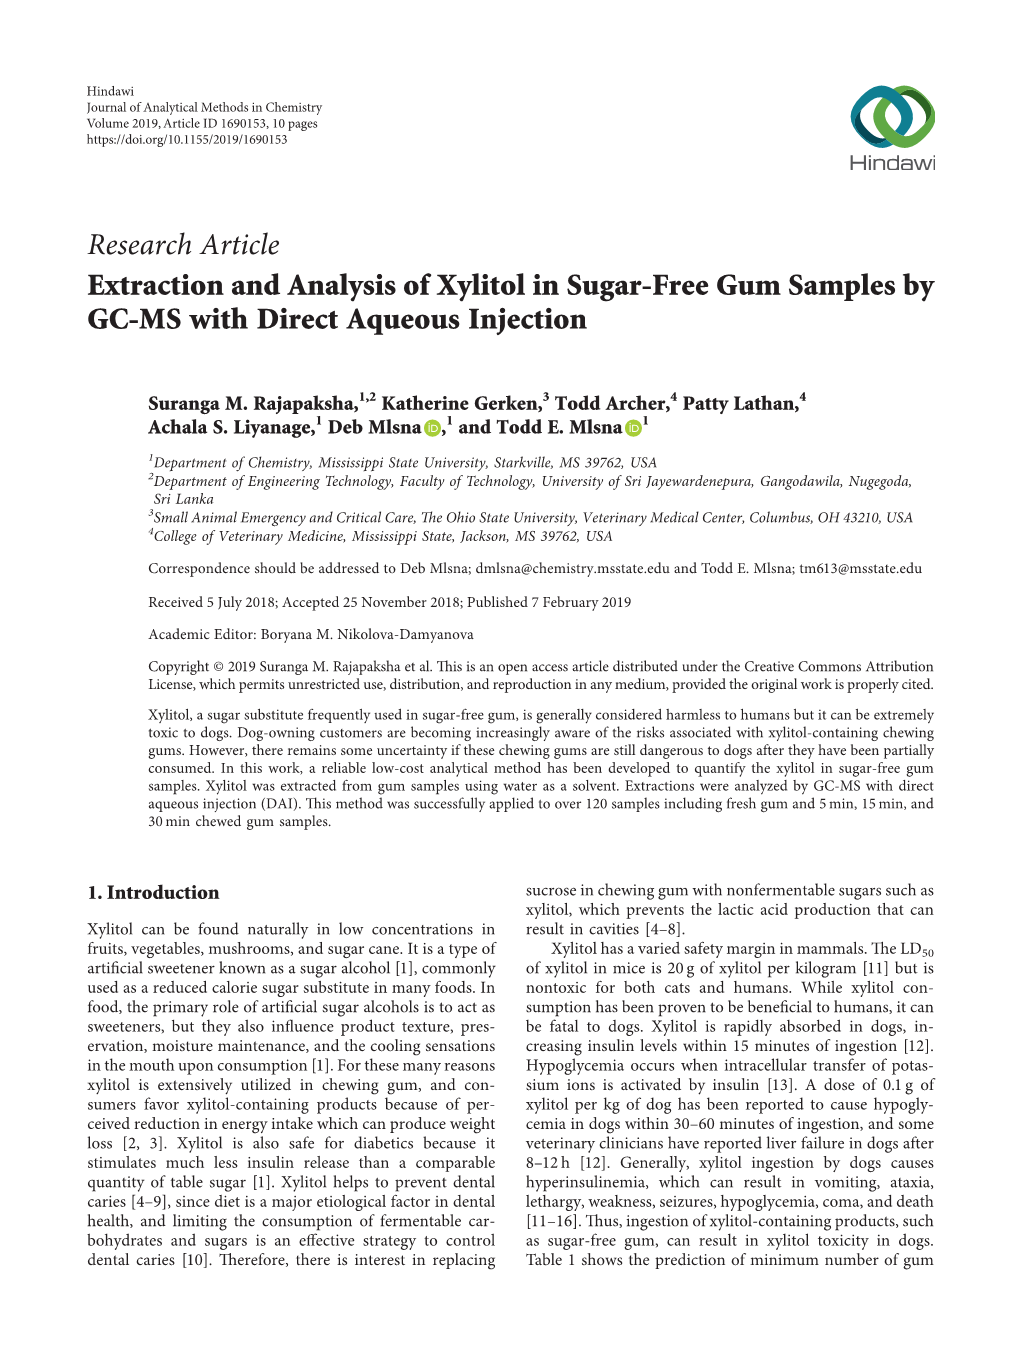 Research Article Extraction and Analysis of Xylitol in Sugar-Free Gum Samples by GC-MS with Direct Aqueous Injection